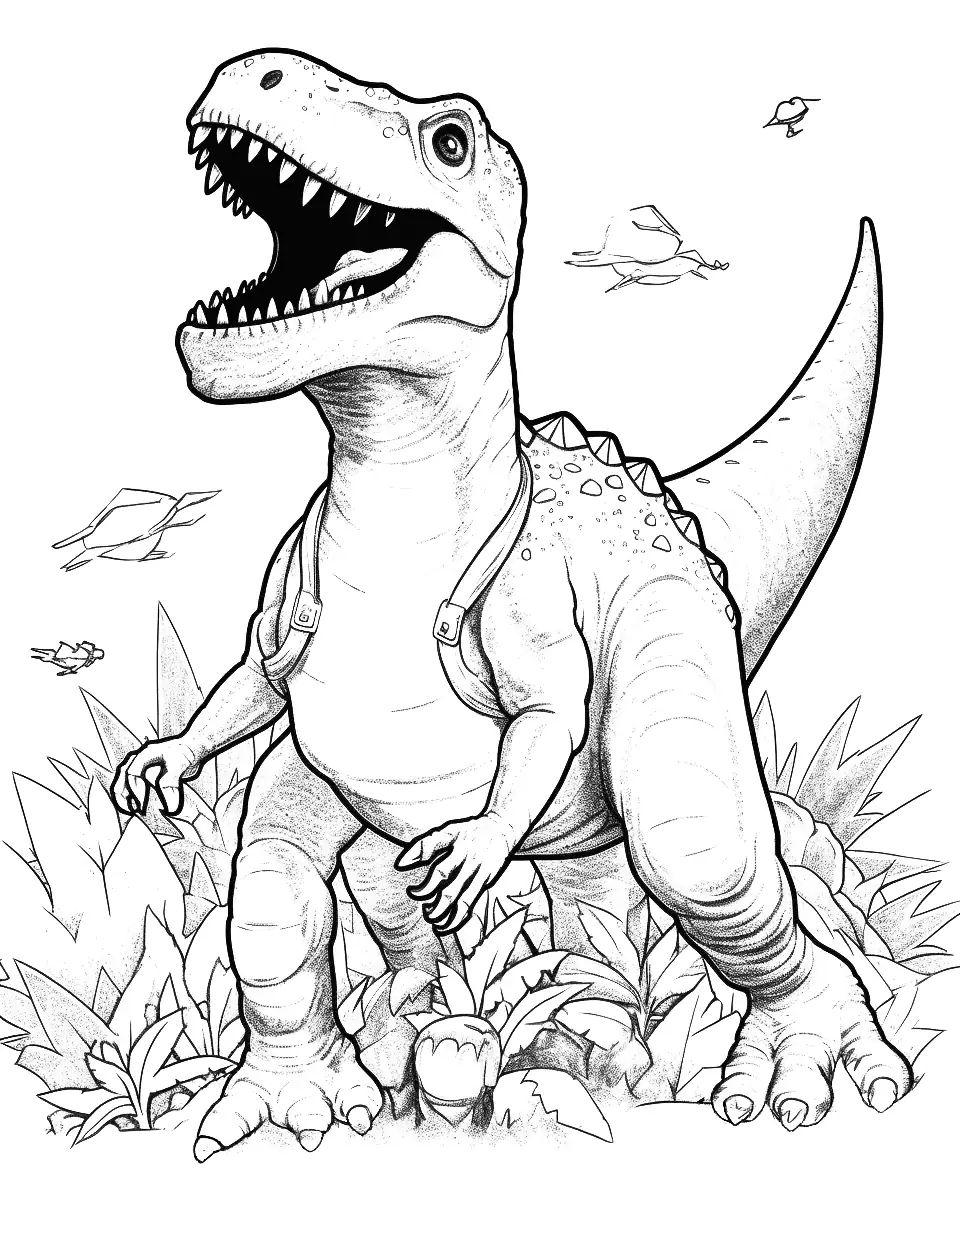 Blue's Rescue Mission Coloring Page - Blue, the raptor from Jurassic World, in an action-packed rescue mission.